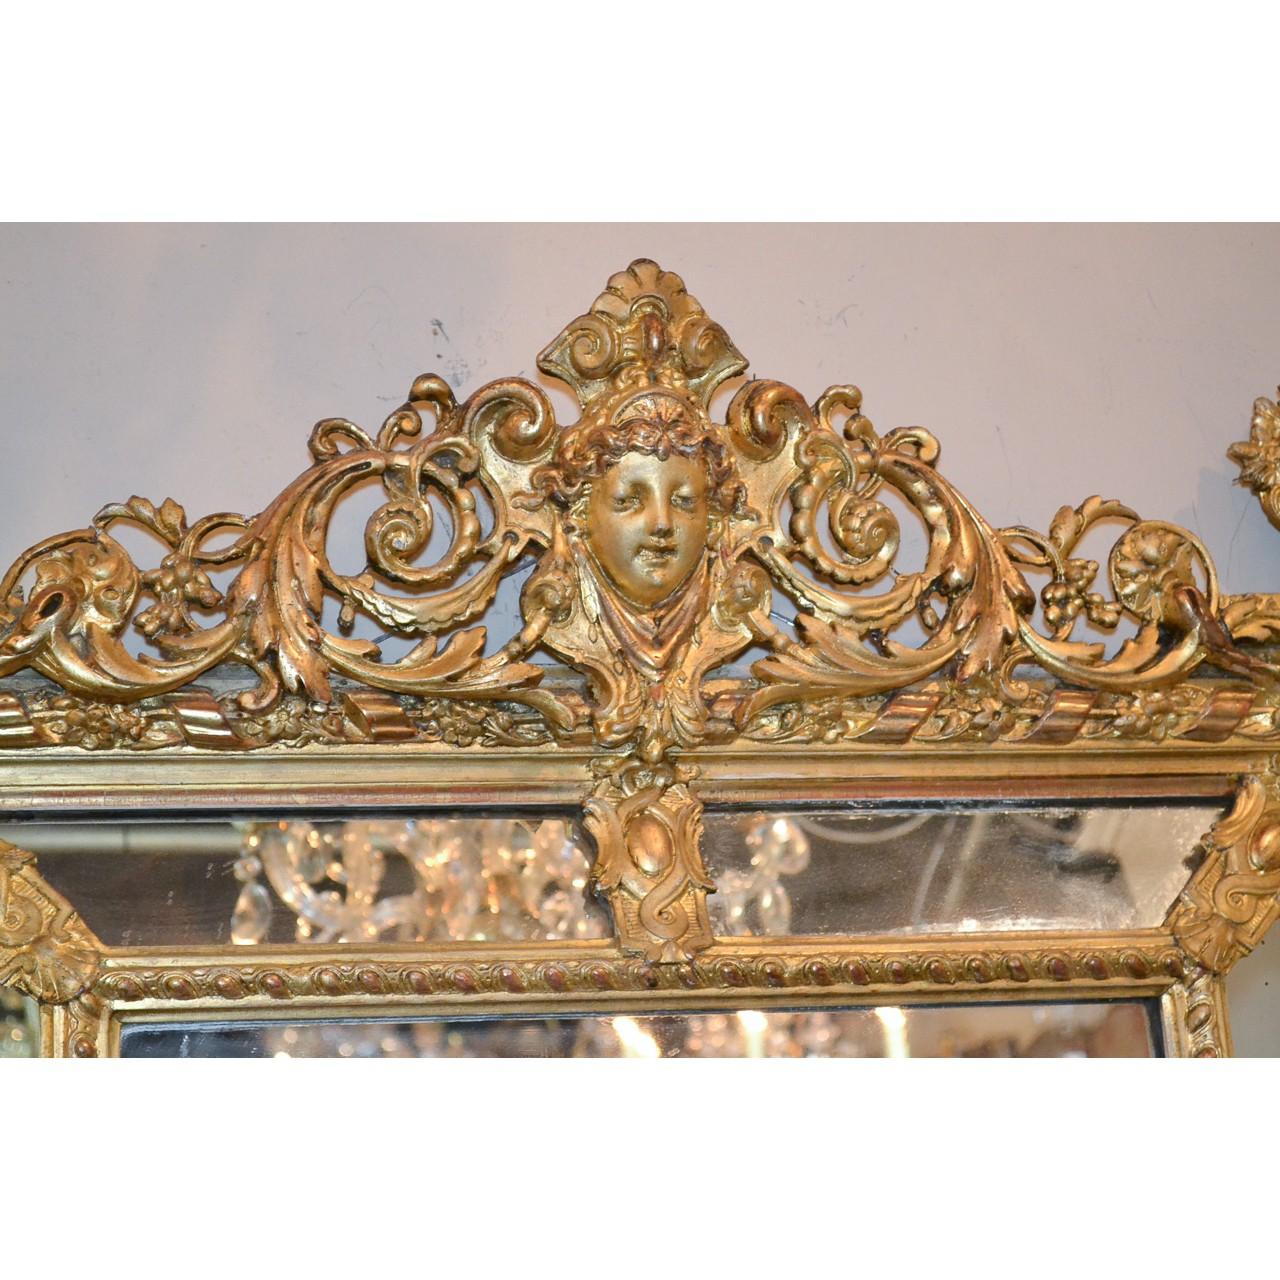 Fine quality and very elegant 19th century French Louis XVI style giltwood cushion mirror. The superbly carved crest centred by a crowned caryatid masque carved in relief, and accented by reticulated leaf scrolls and berry clusters. The corners with